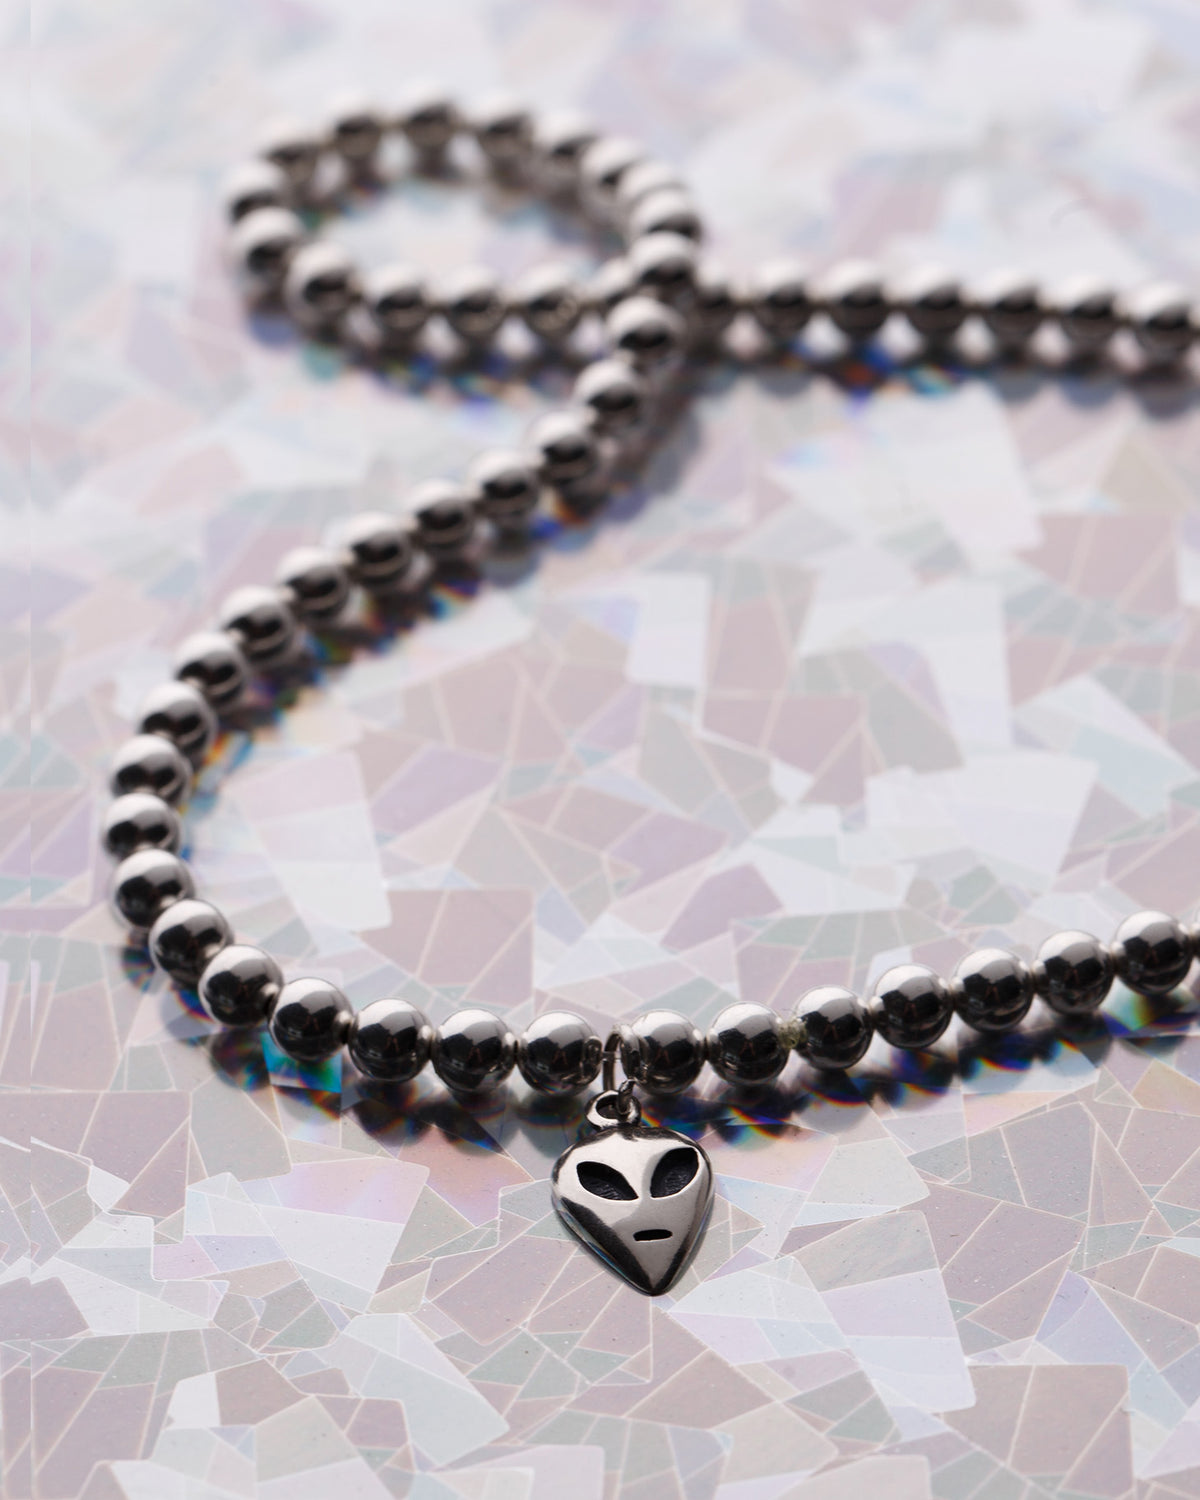 AG47 with Space Invader - Silver Balls Beaded Choker Necklace